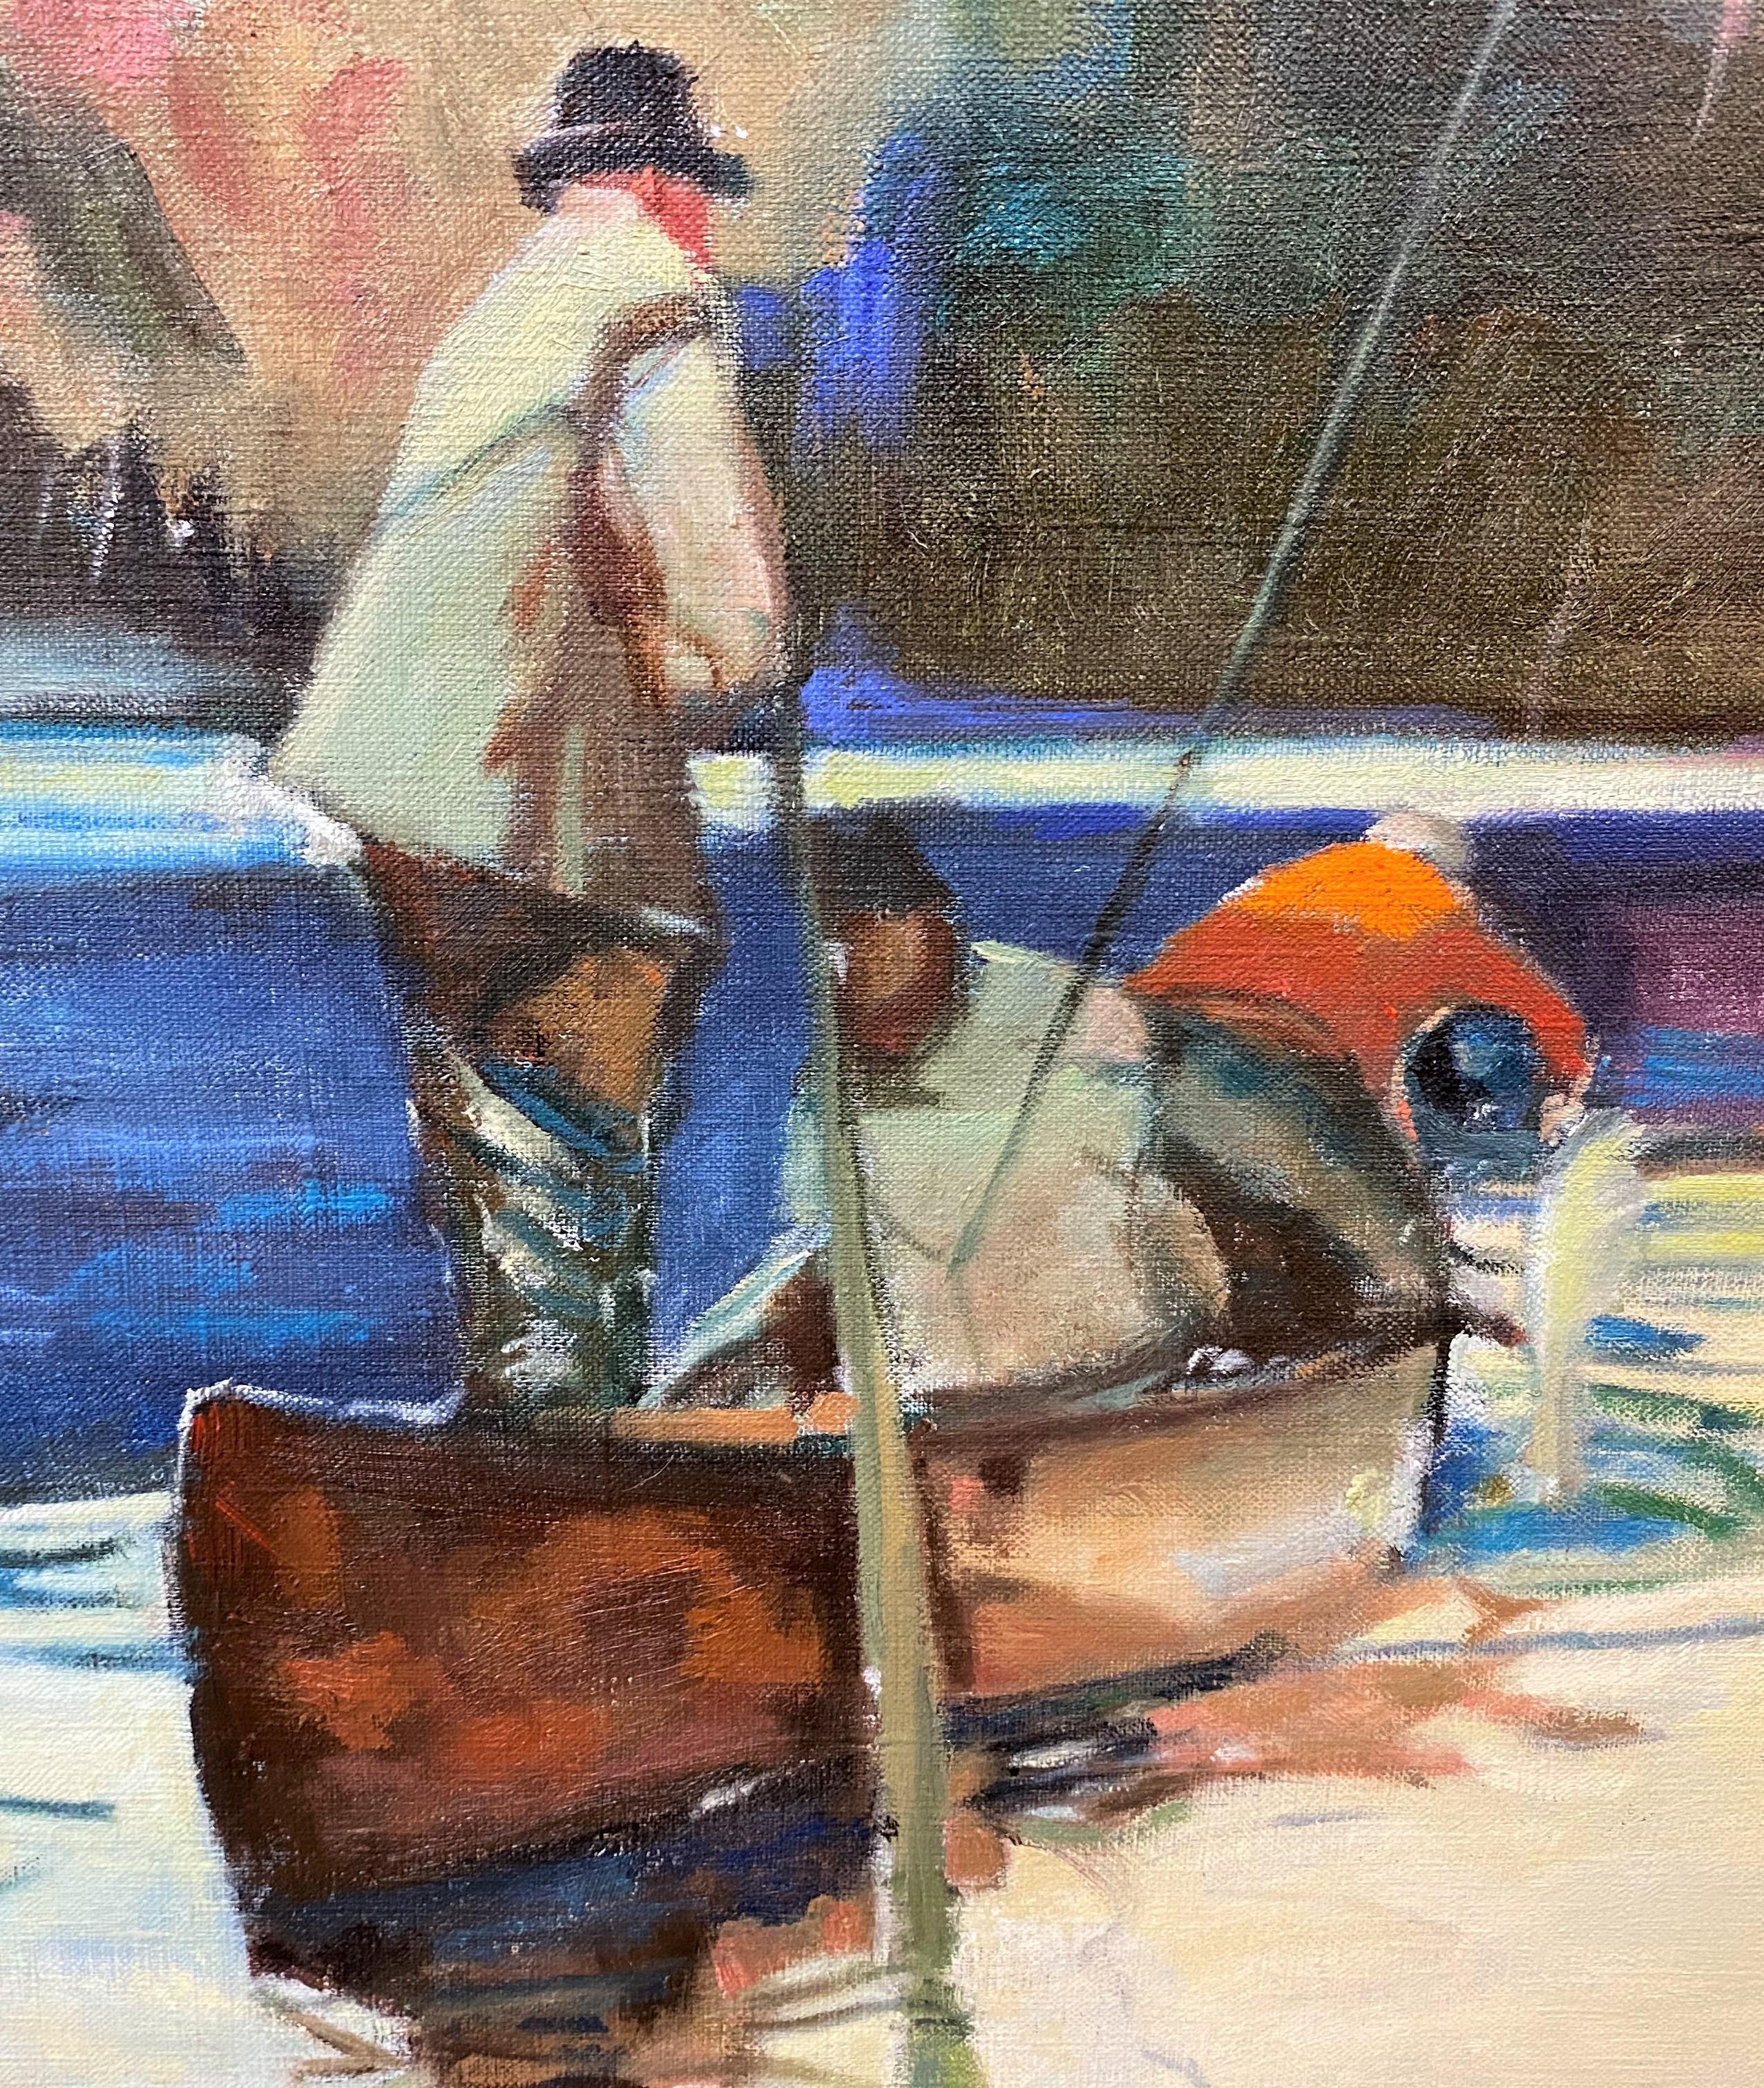 Salmon Fishing - American Impressionist Painting by John Whorf